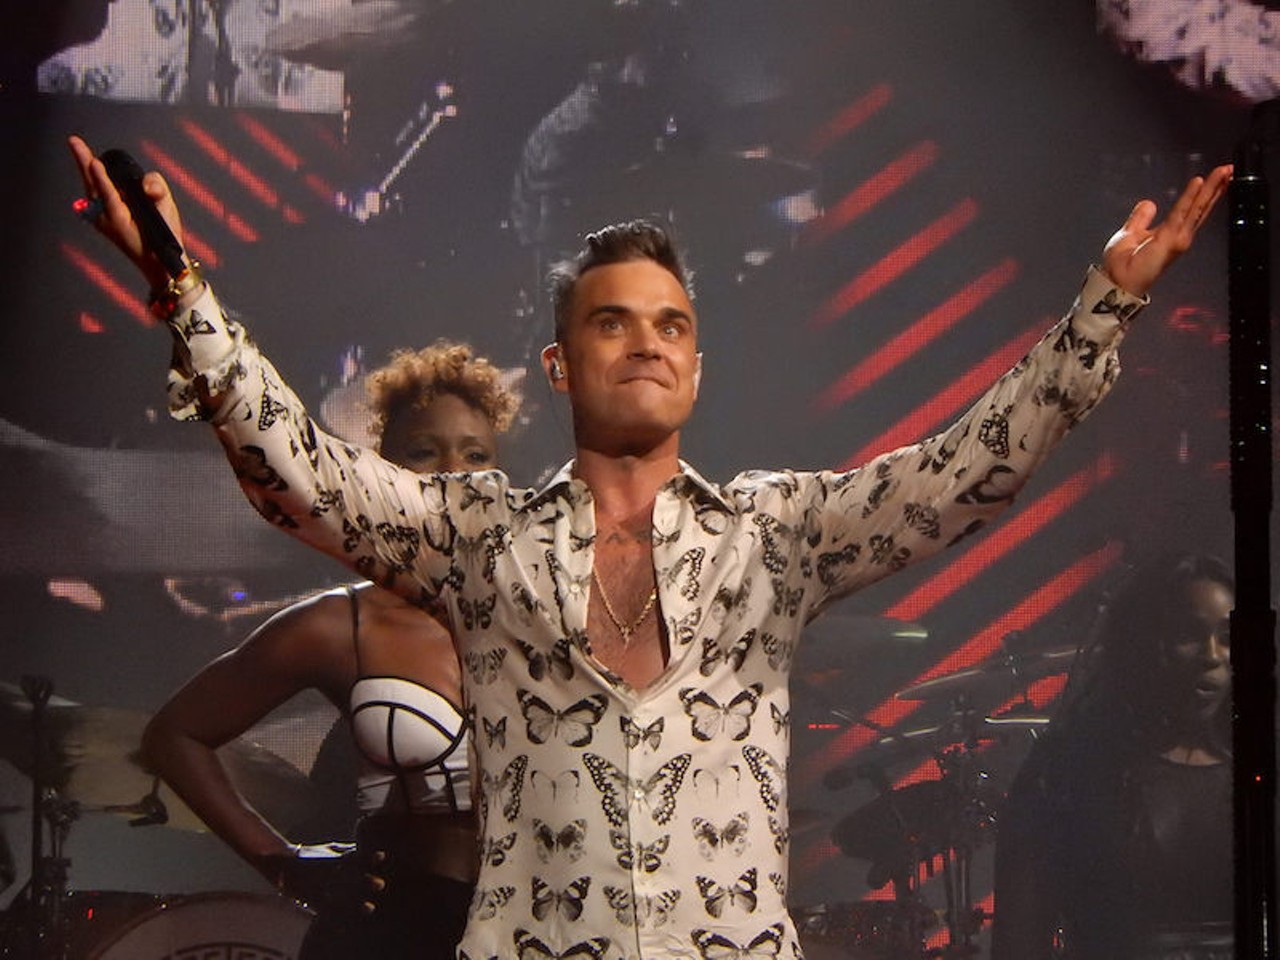 Robbie Williams &#151; &#147;Karma Killer&#148;
Was Nada Surf not cathartic enough? Here&#146;s one where our British dreamboat politely suggests that you choke on your Bacardi and Coke.
Photo via Drewde Fawkes (Creative Commons)